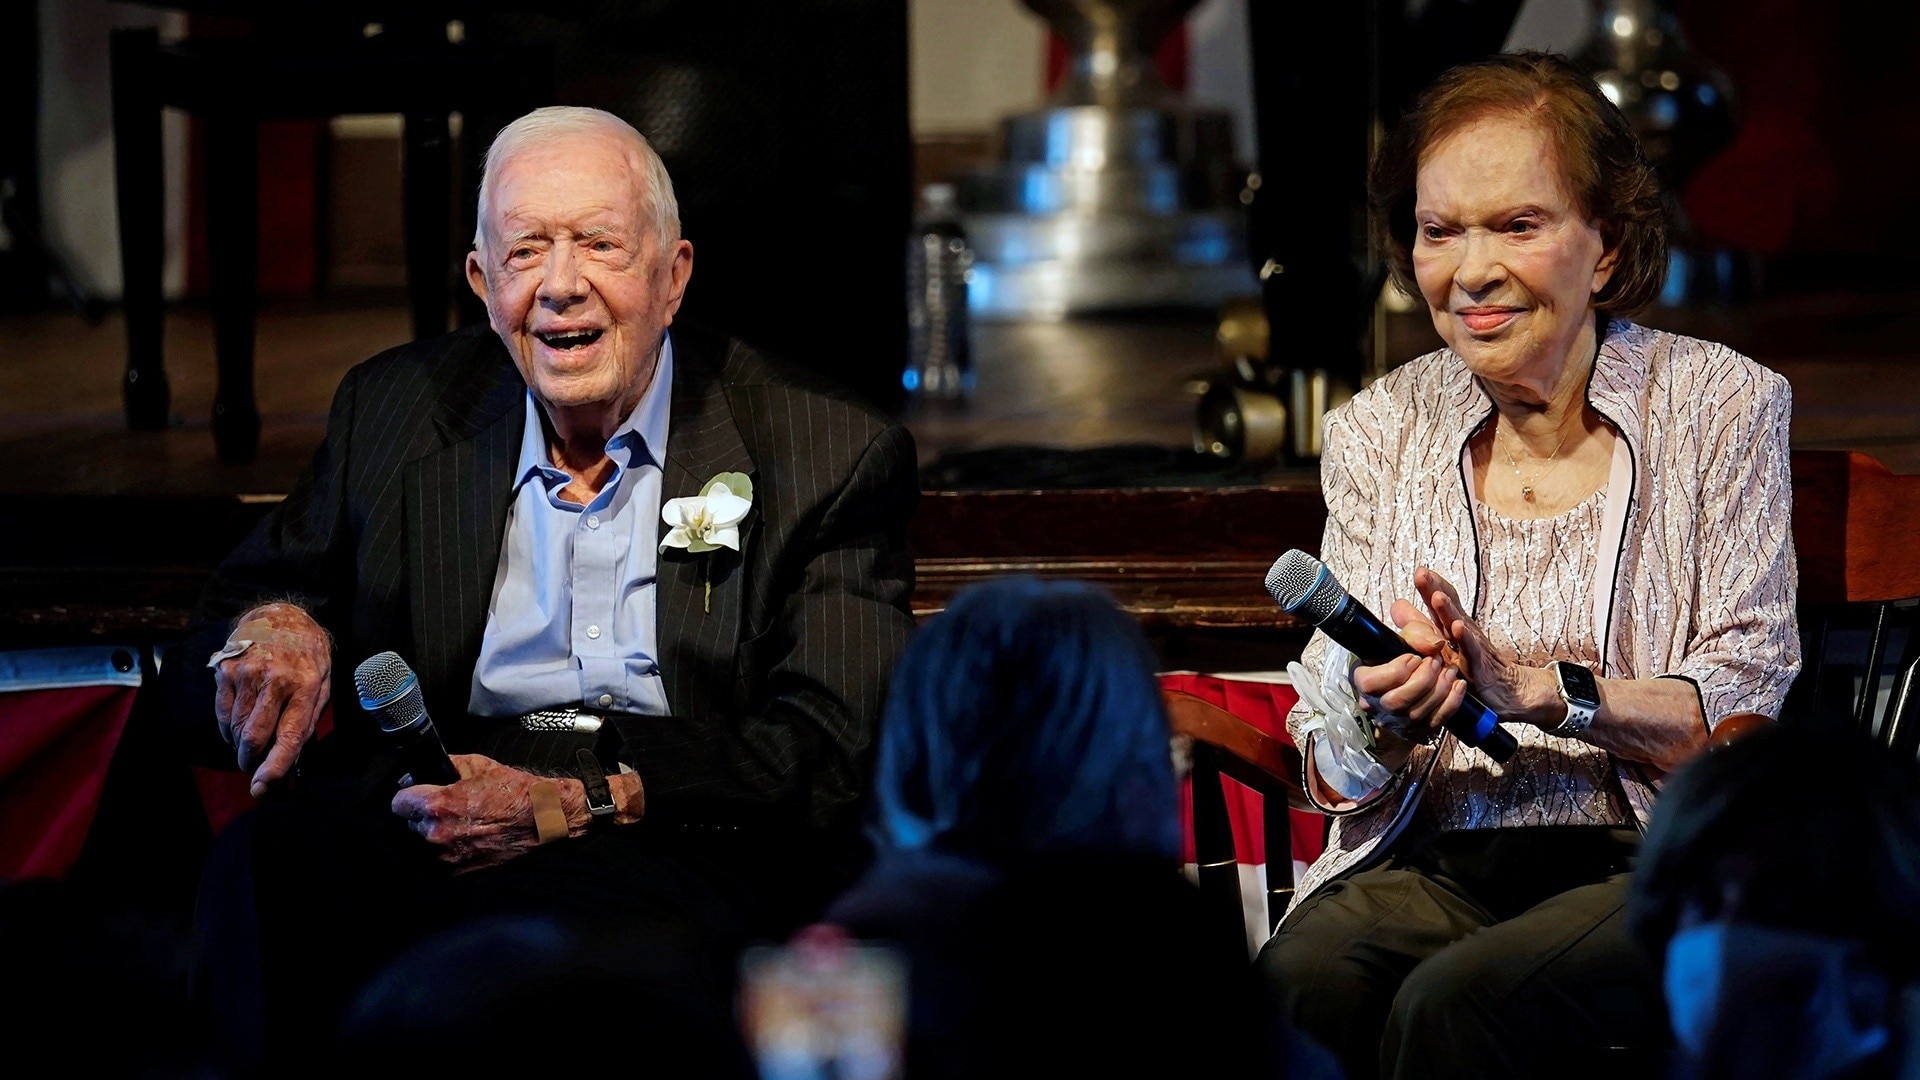 Watch TODAY Highlight: Former President Jimmy Carter and wife Rosalynn